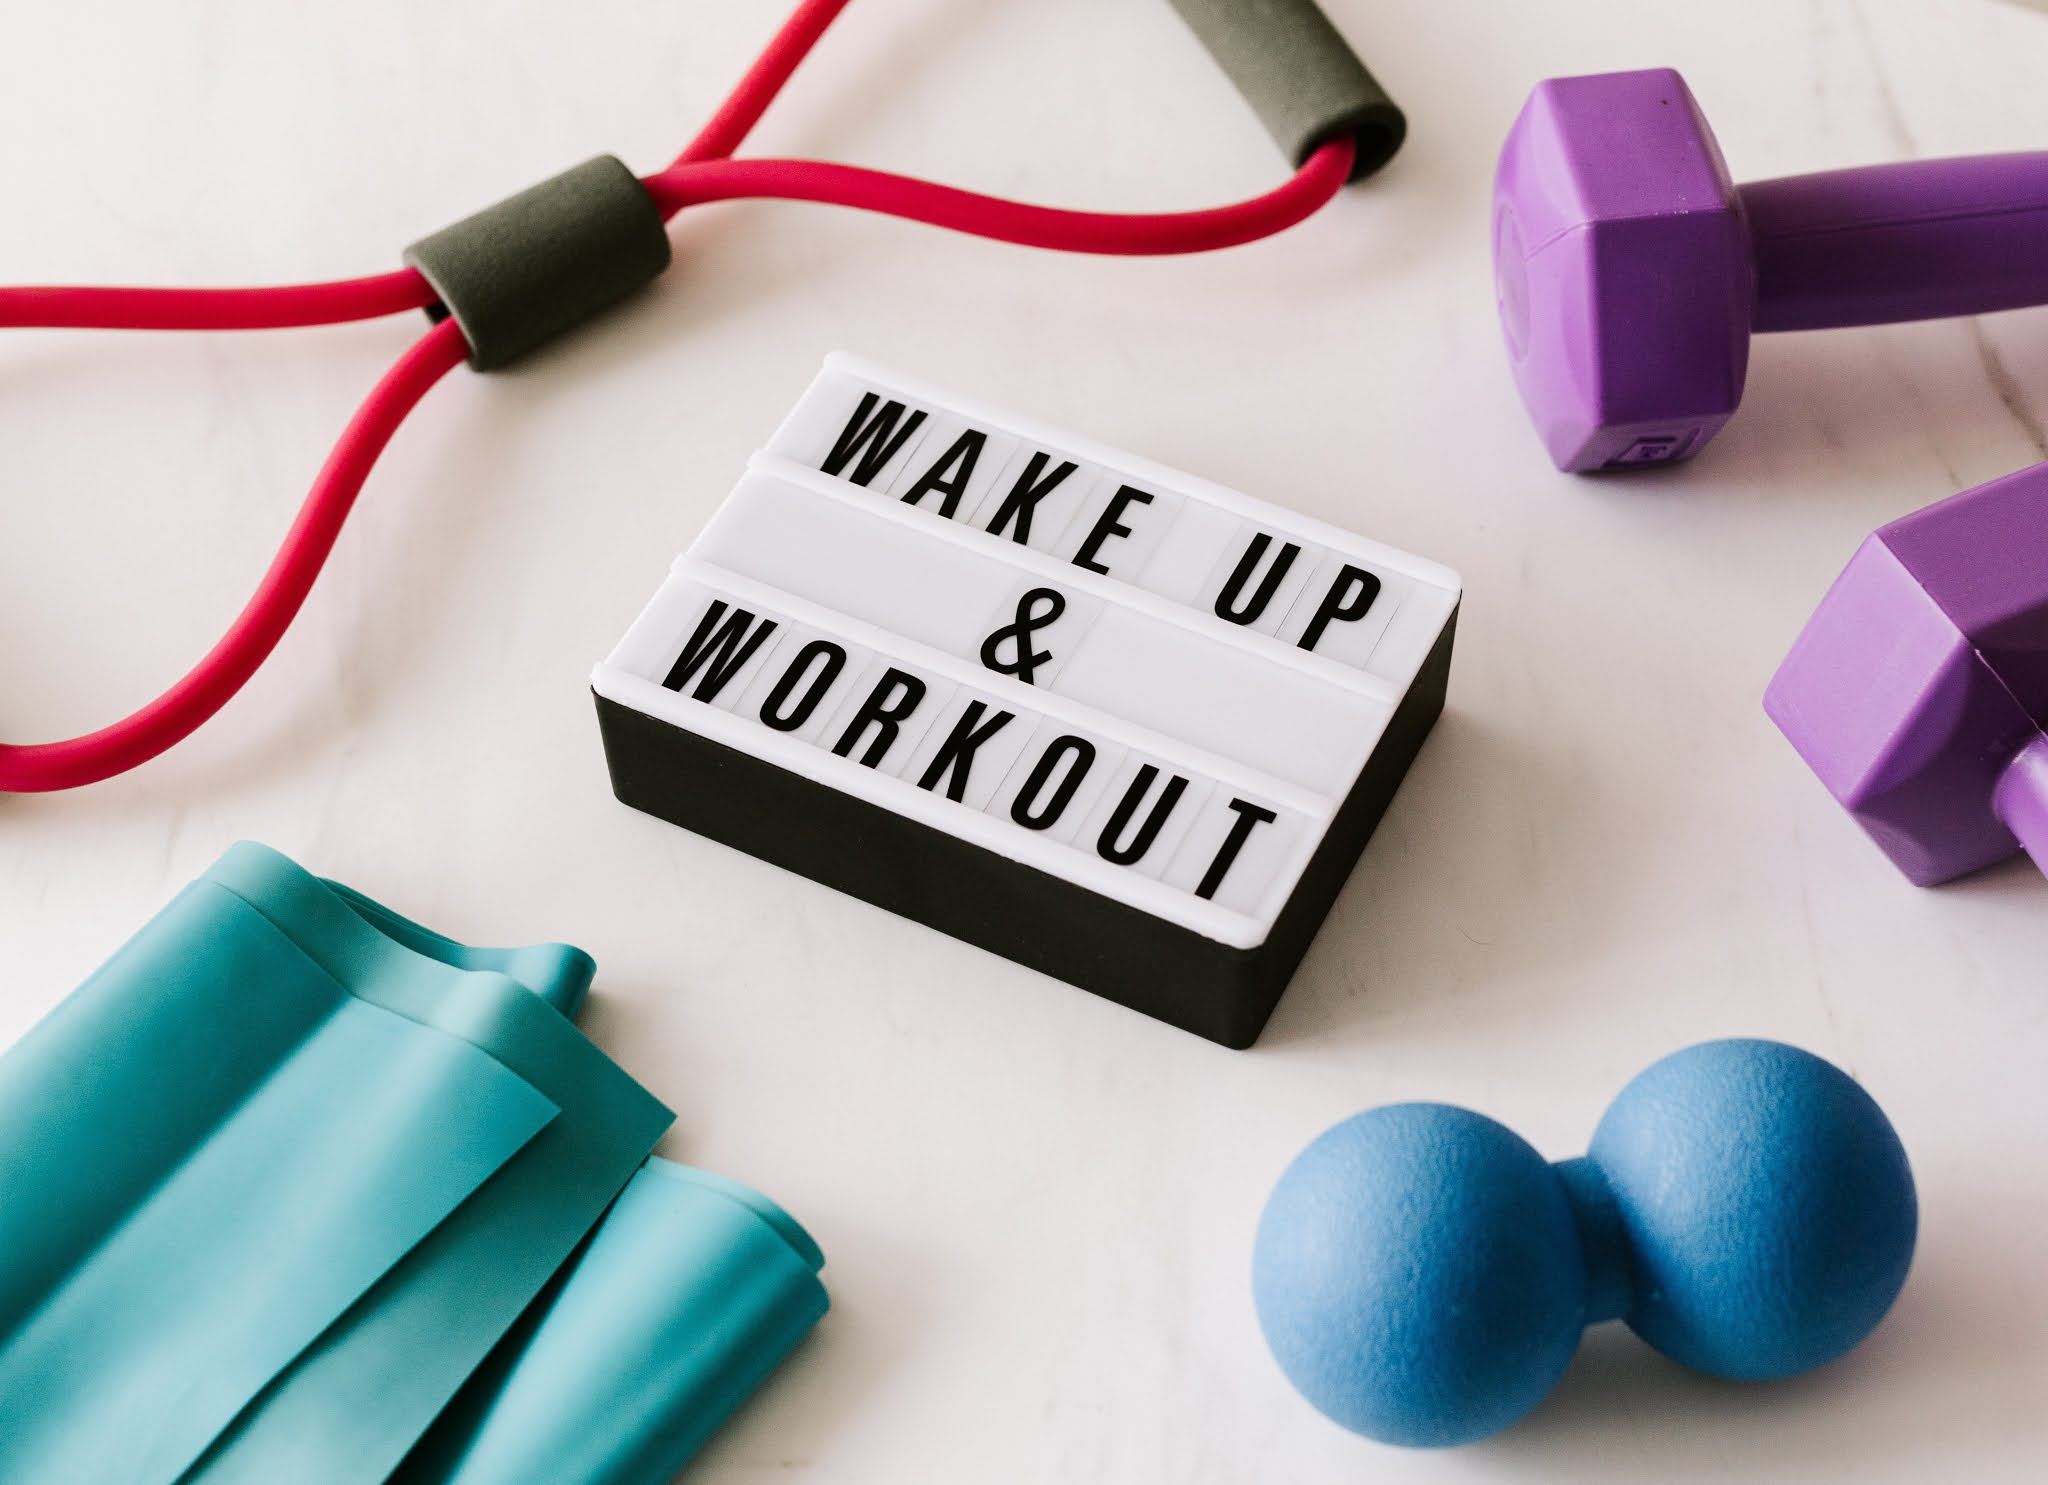 wake up and Work out. Exercise motivation Quote